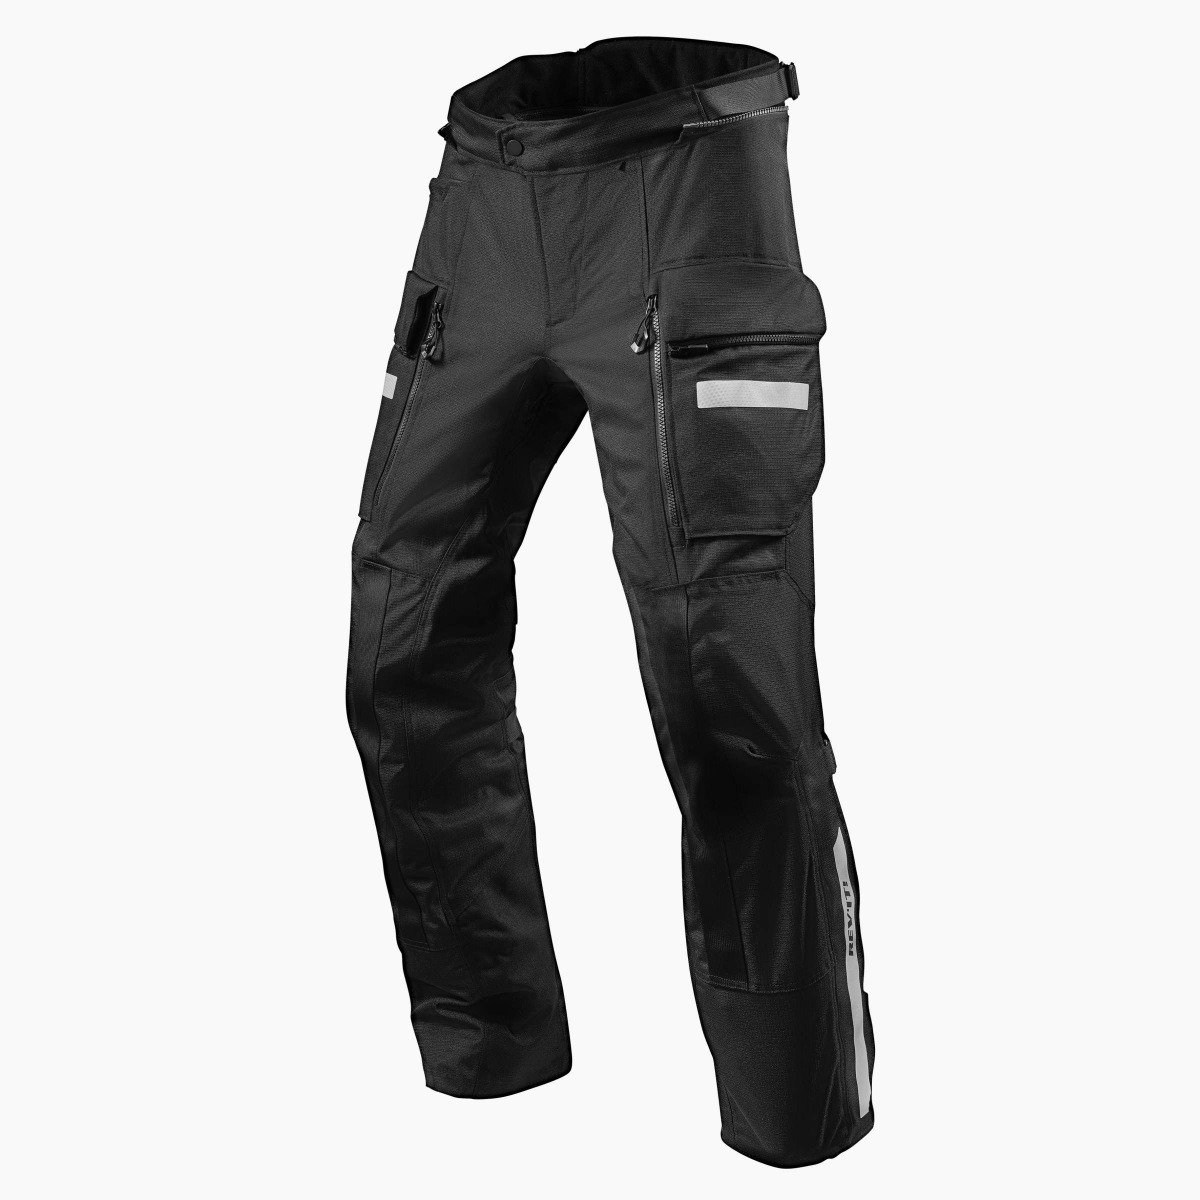 Image of REV'IT! Sand 4 H2O Long Black Motorcycle Pants Size 2XL ID 8700001316408